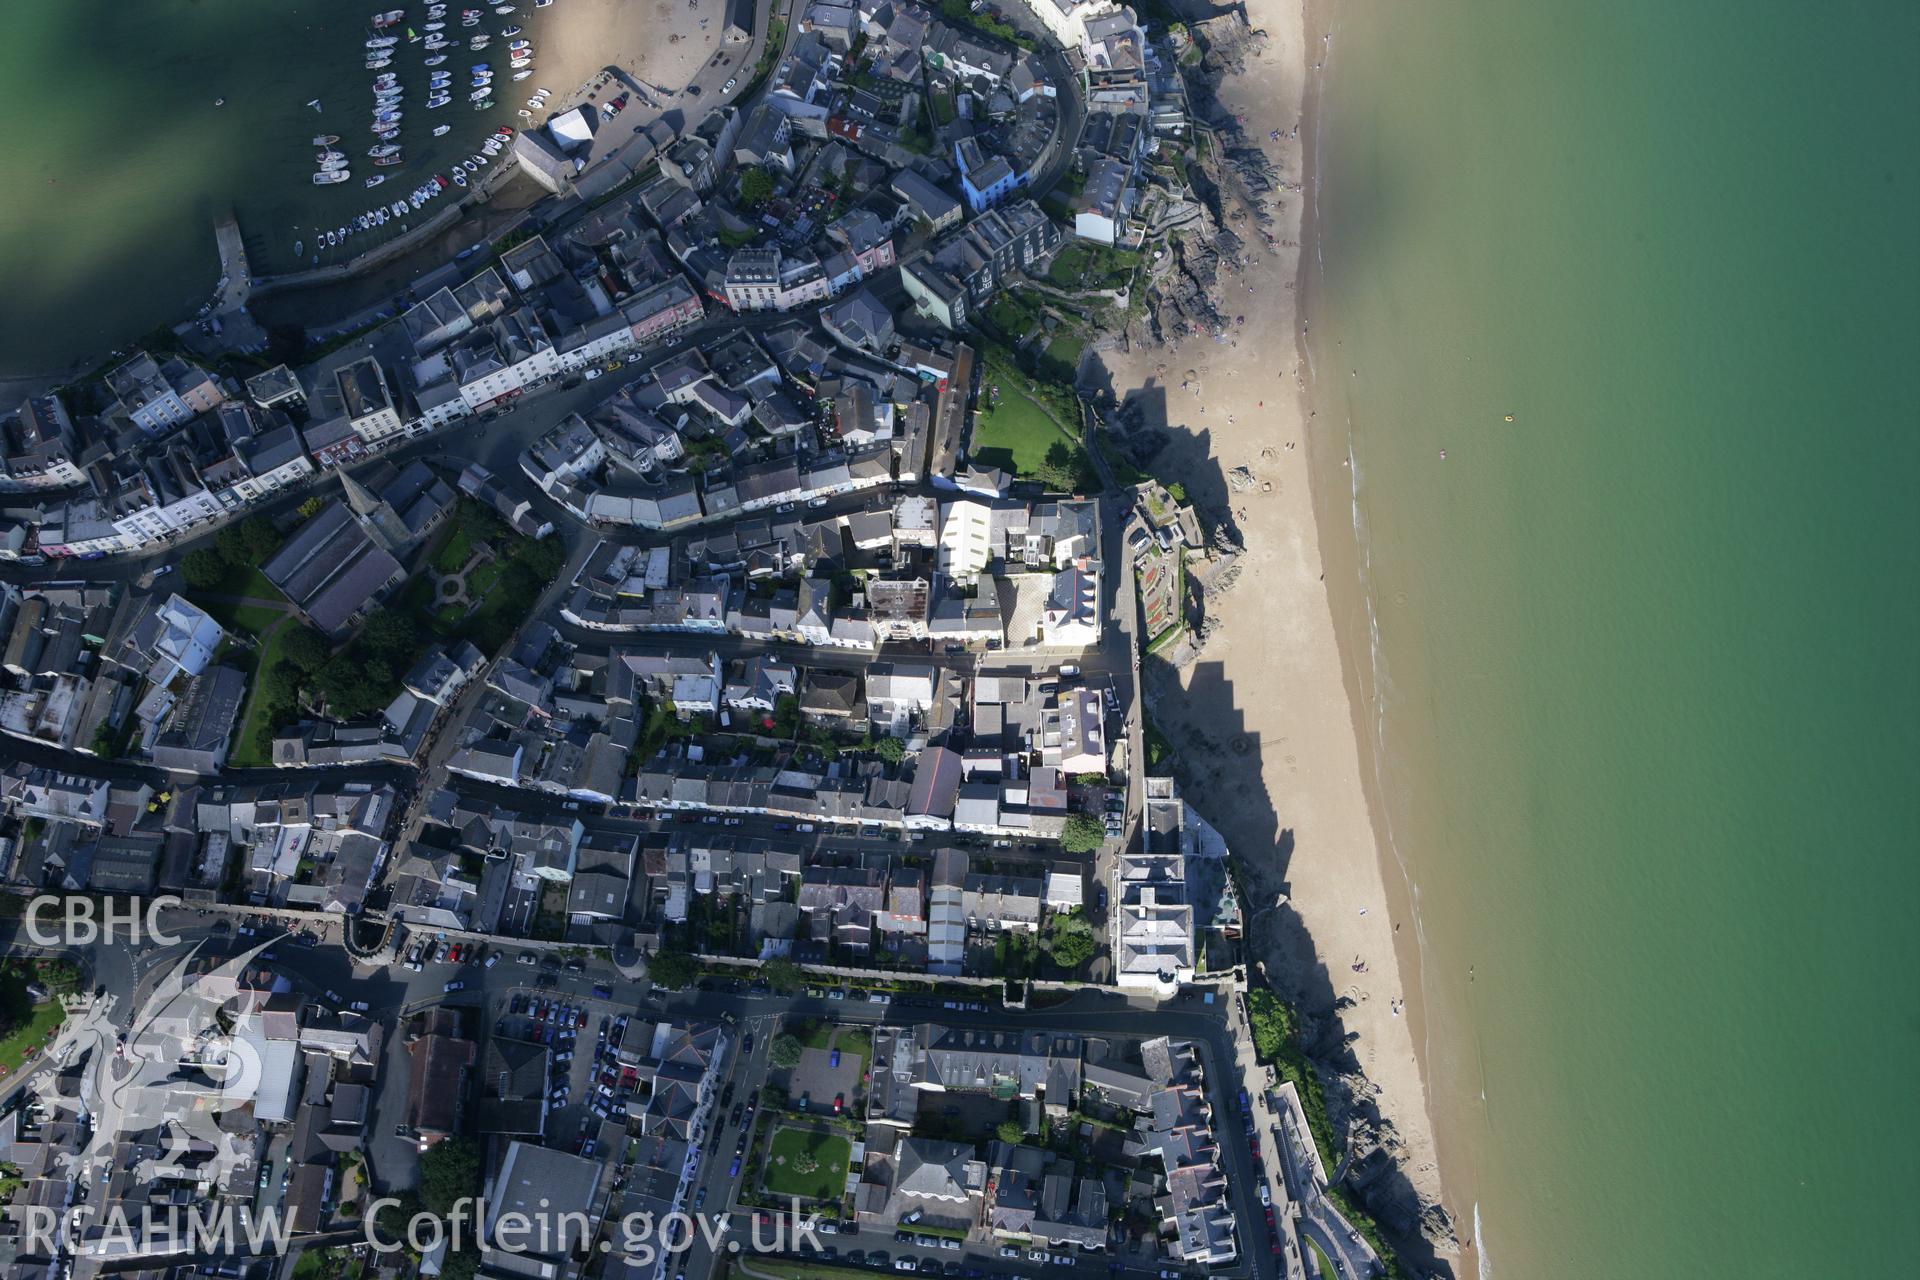 RCAHMW colour oblique aerial photograph of Tenby from the south-west. Taken on 30 July 2007 by Toby Driver